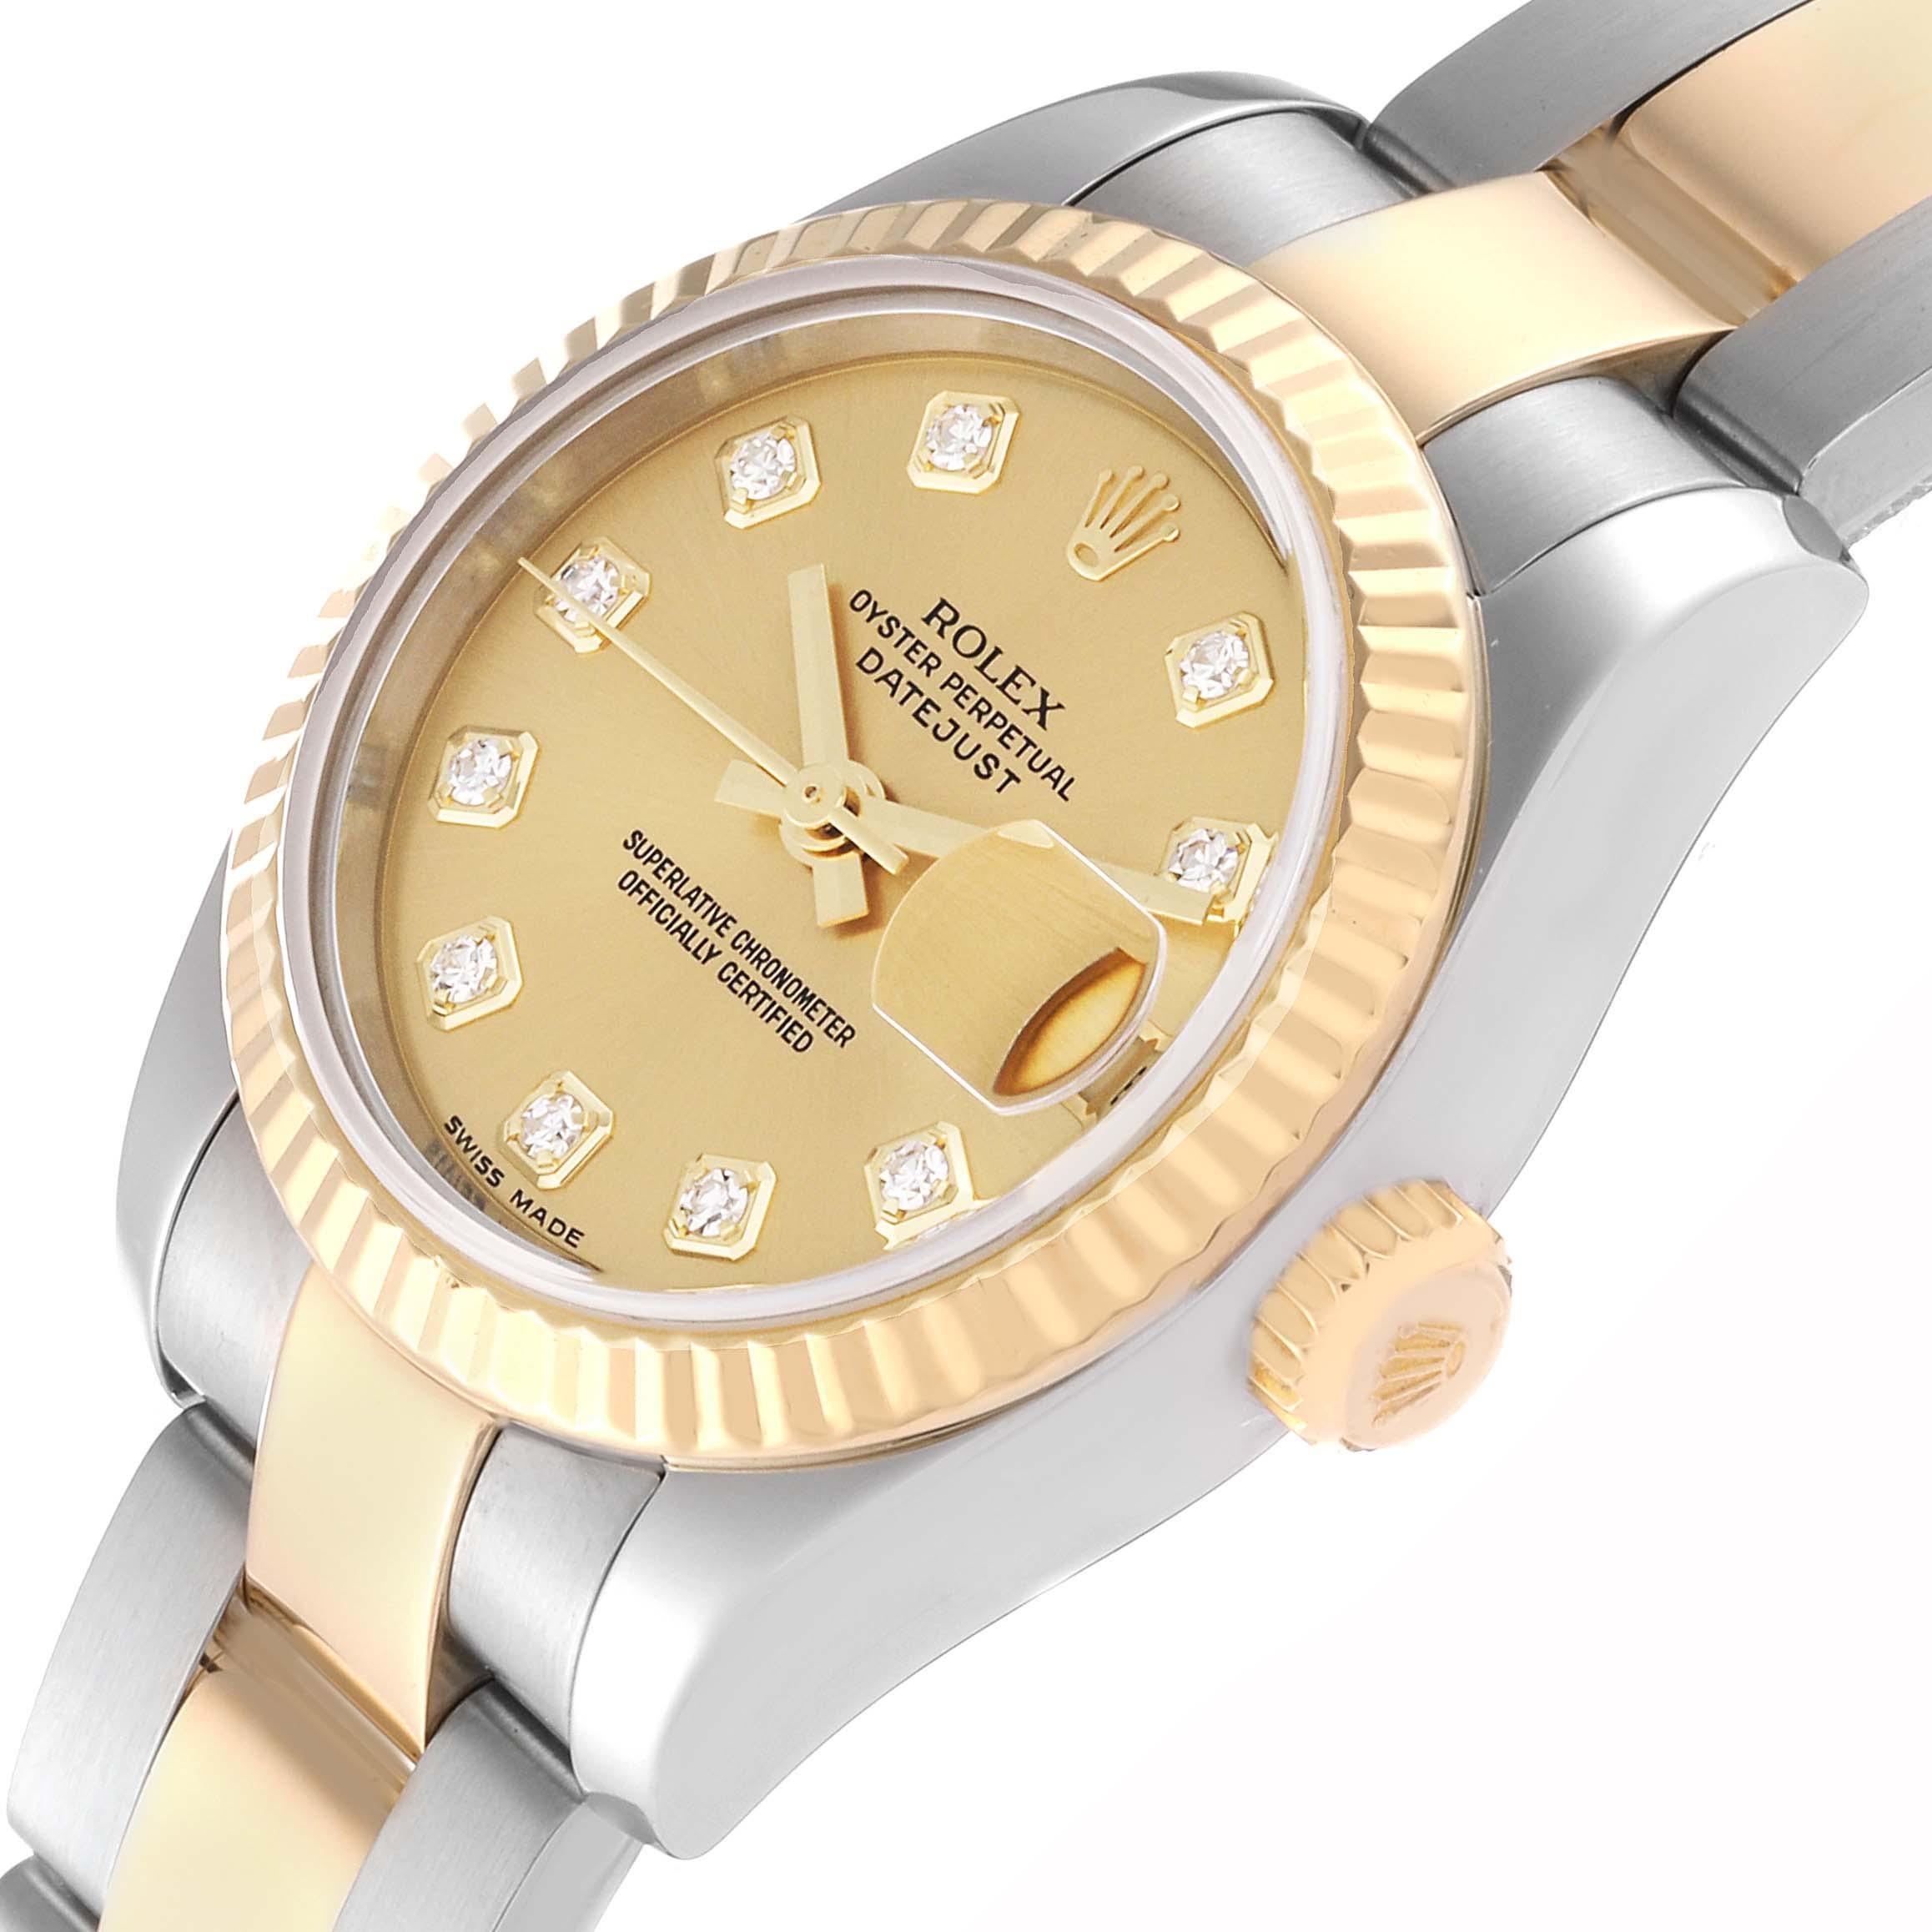 Rolex Datejust Diamond Dial Steel Yellow Gold Ladies Watch 179173 Box Papers. Officially certified chronometer automatic self-winding movement. Stainless steel oyster case 26 mm in diameter. Rolex logo on an 18K yellow gold crown. 18k yellow gold